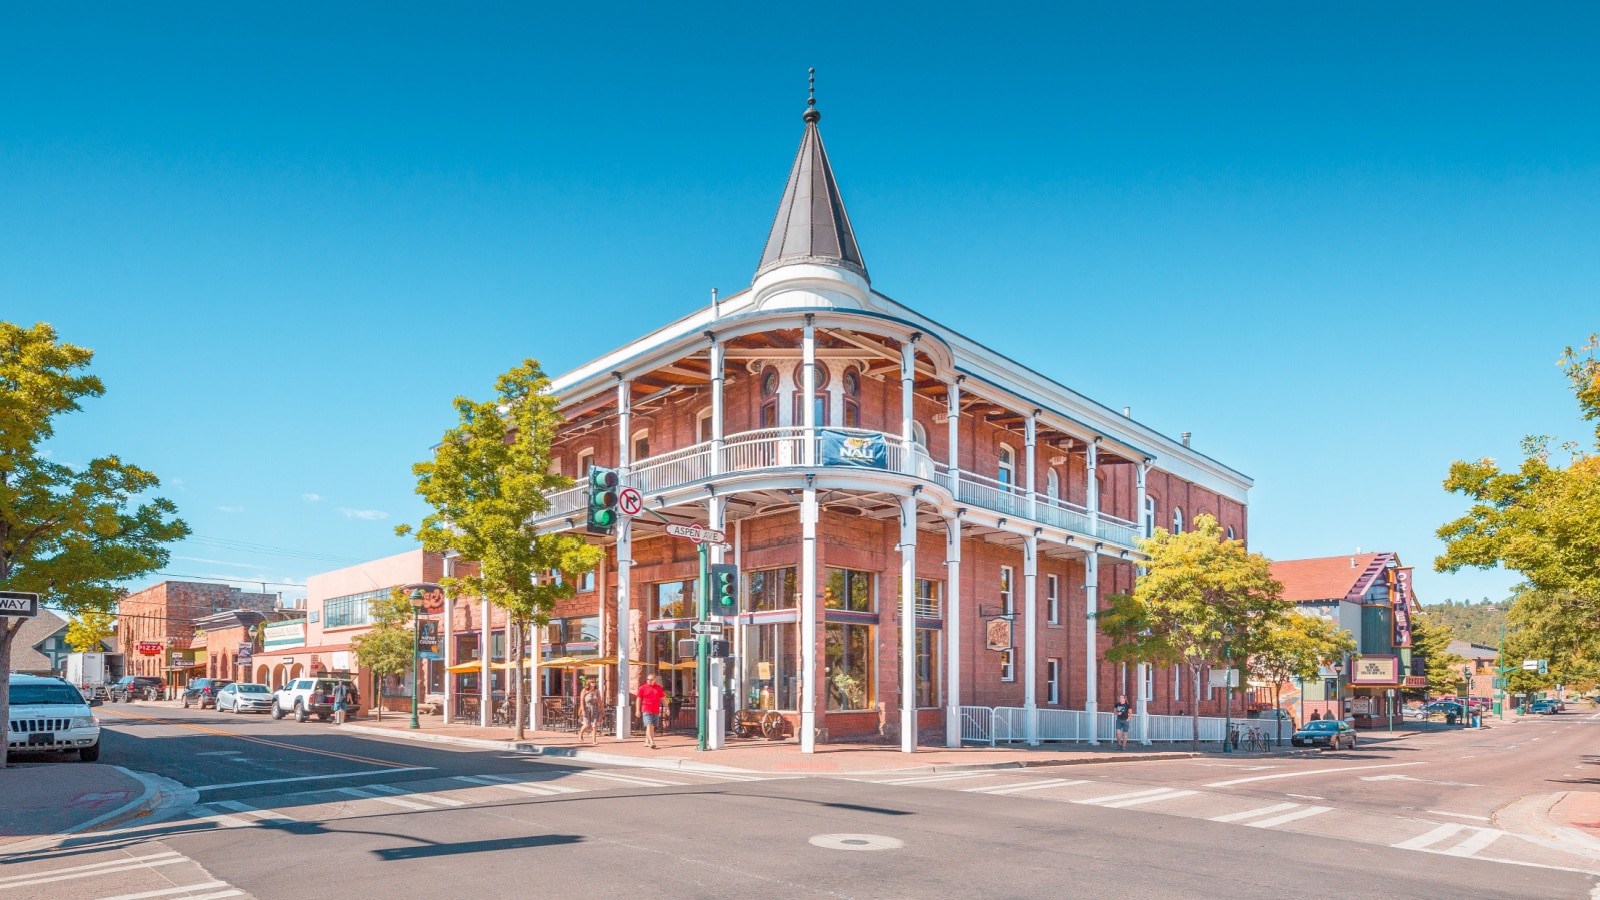 FLAGSTAFF, ARIZONA - SEPTEMBER 19, 2016: Beautiful view of the historic city center of Flagstaff on sunny day with blue sky in summer, northern Arizona, American Southwest, USA.